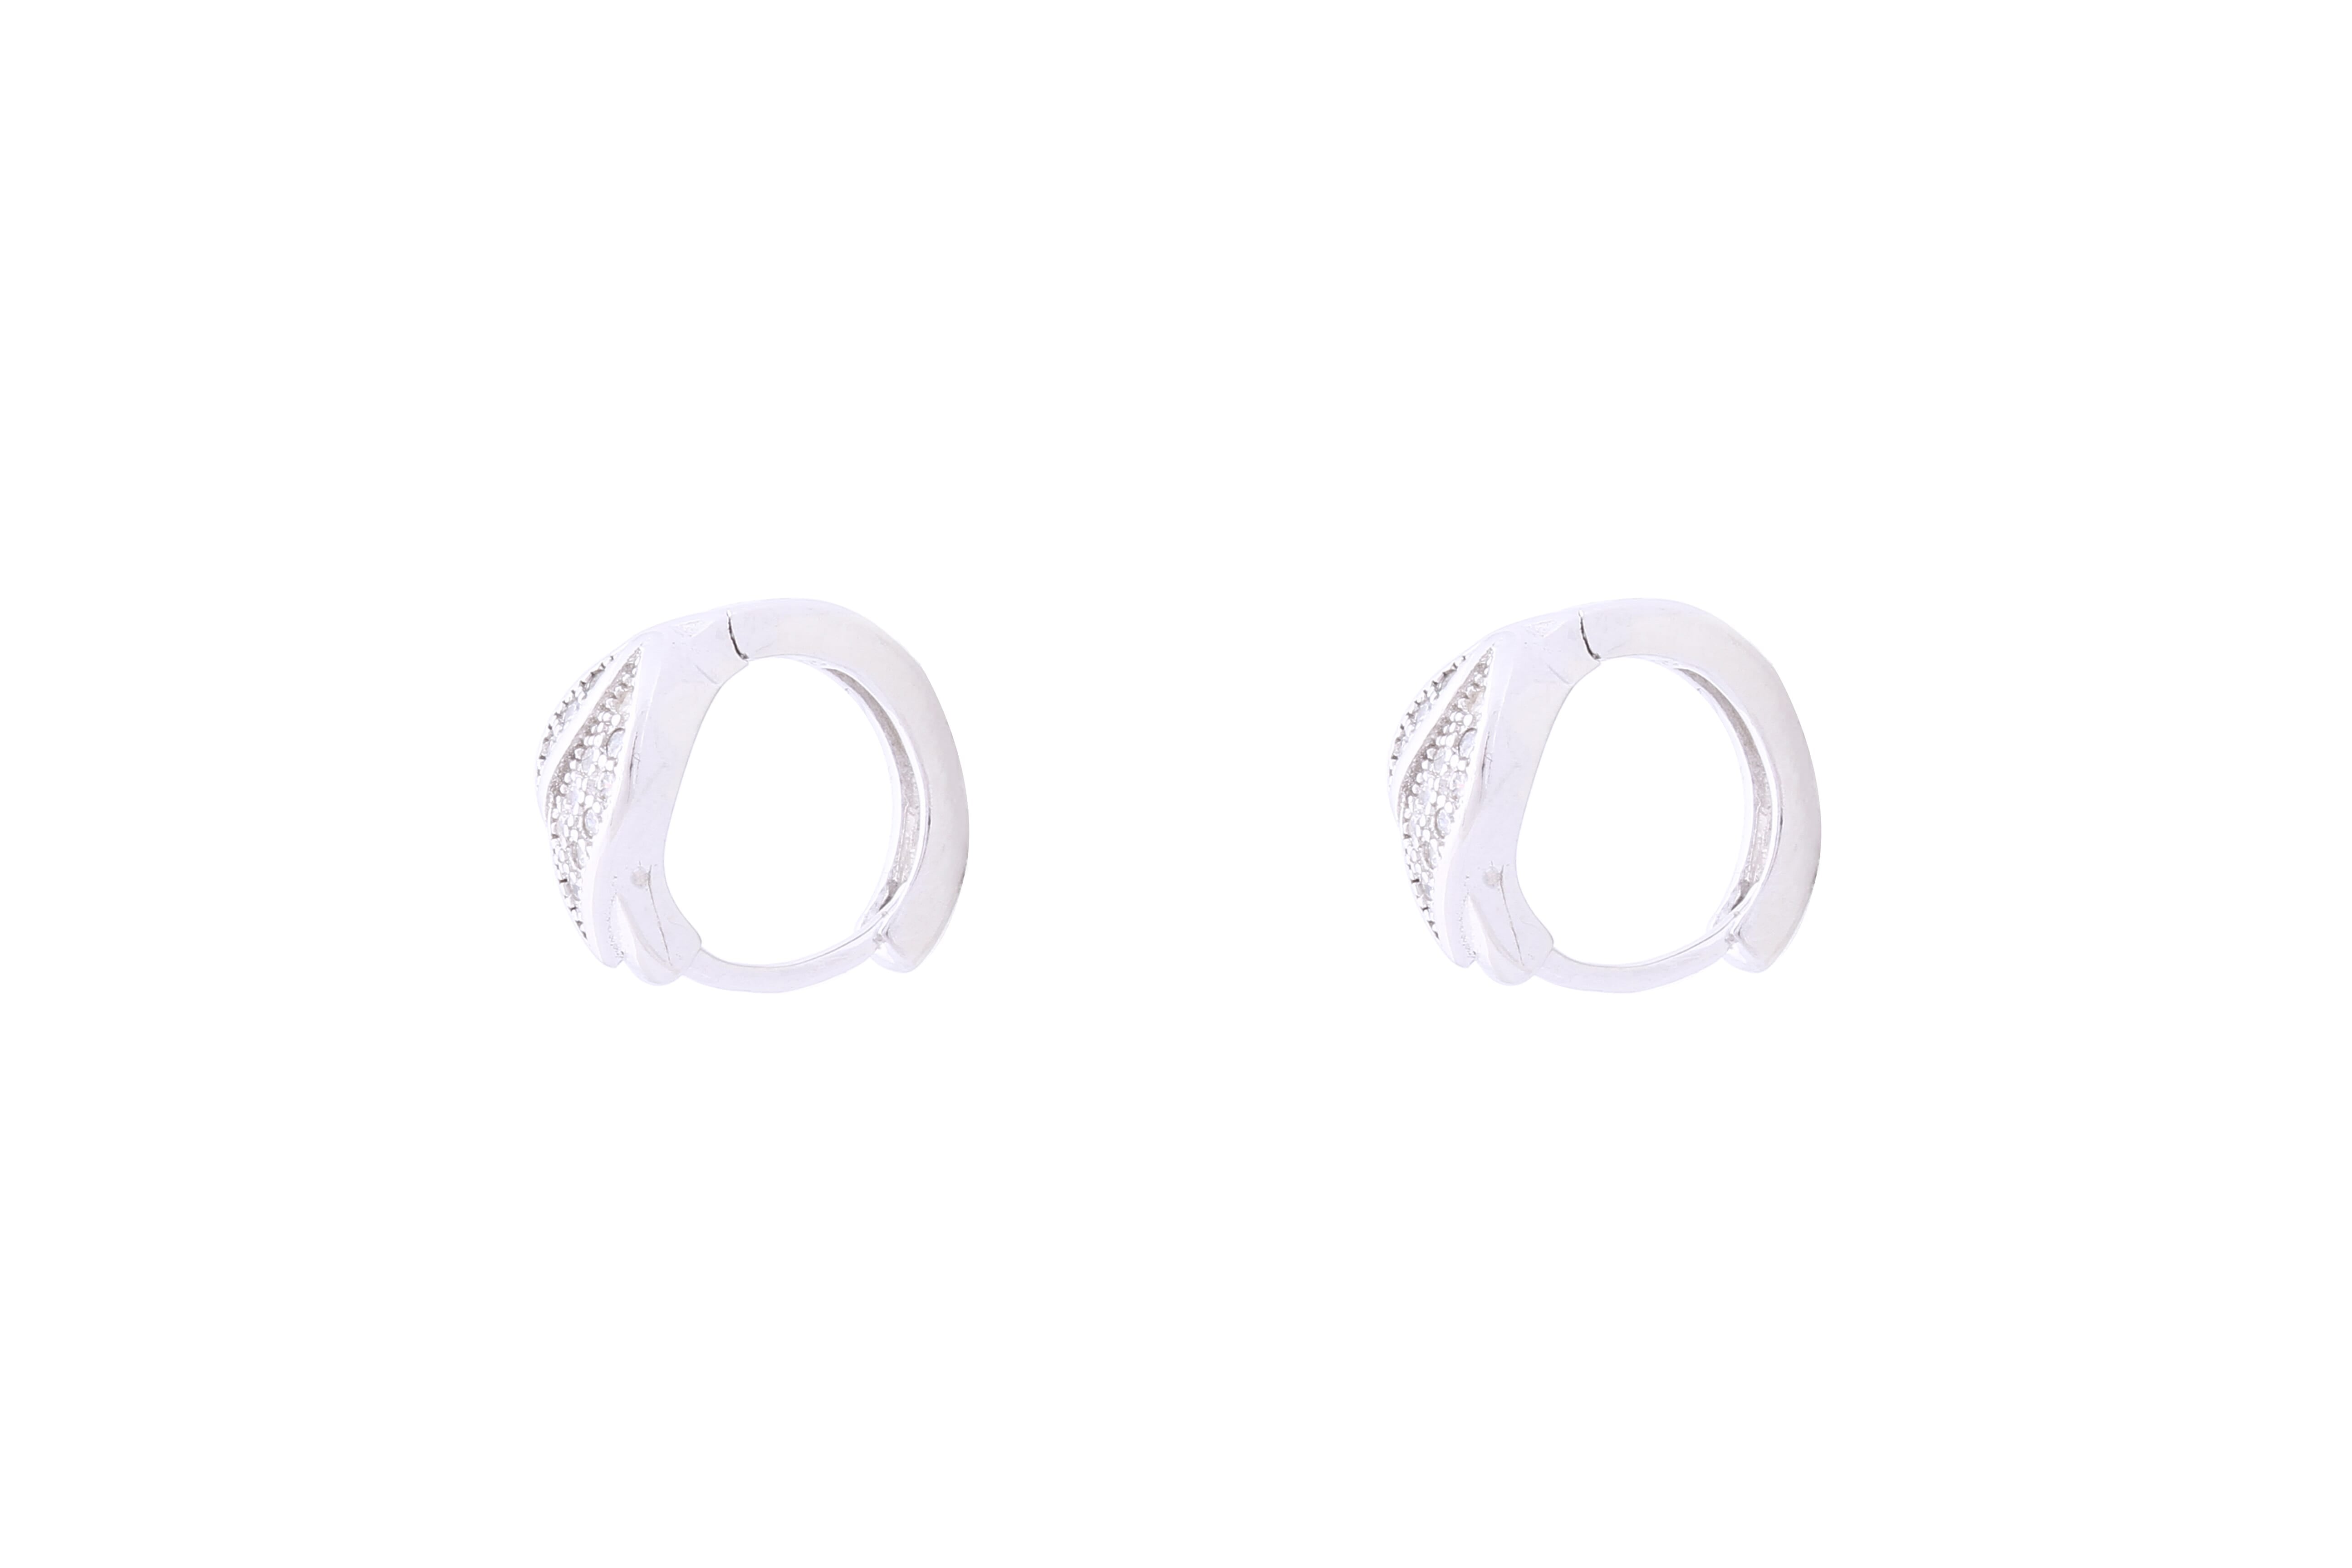 Asfour Crystal Hoop Earring With Leave Design in 925 Sterling Silver ER0407